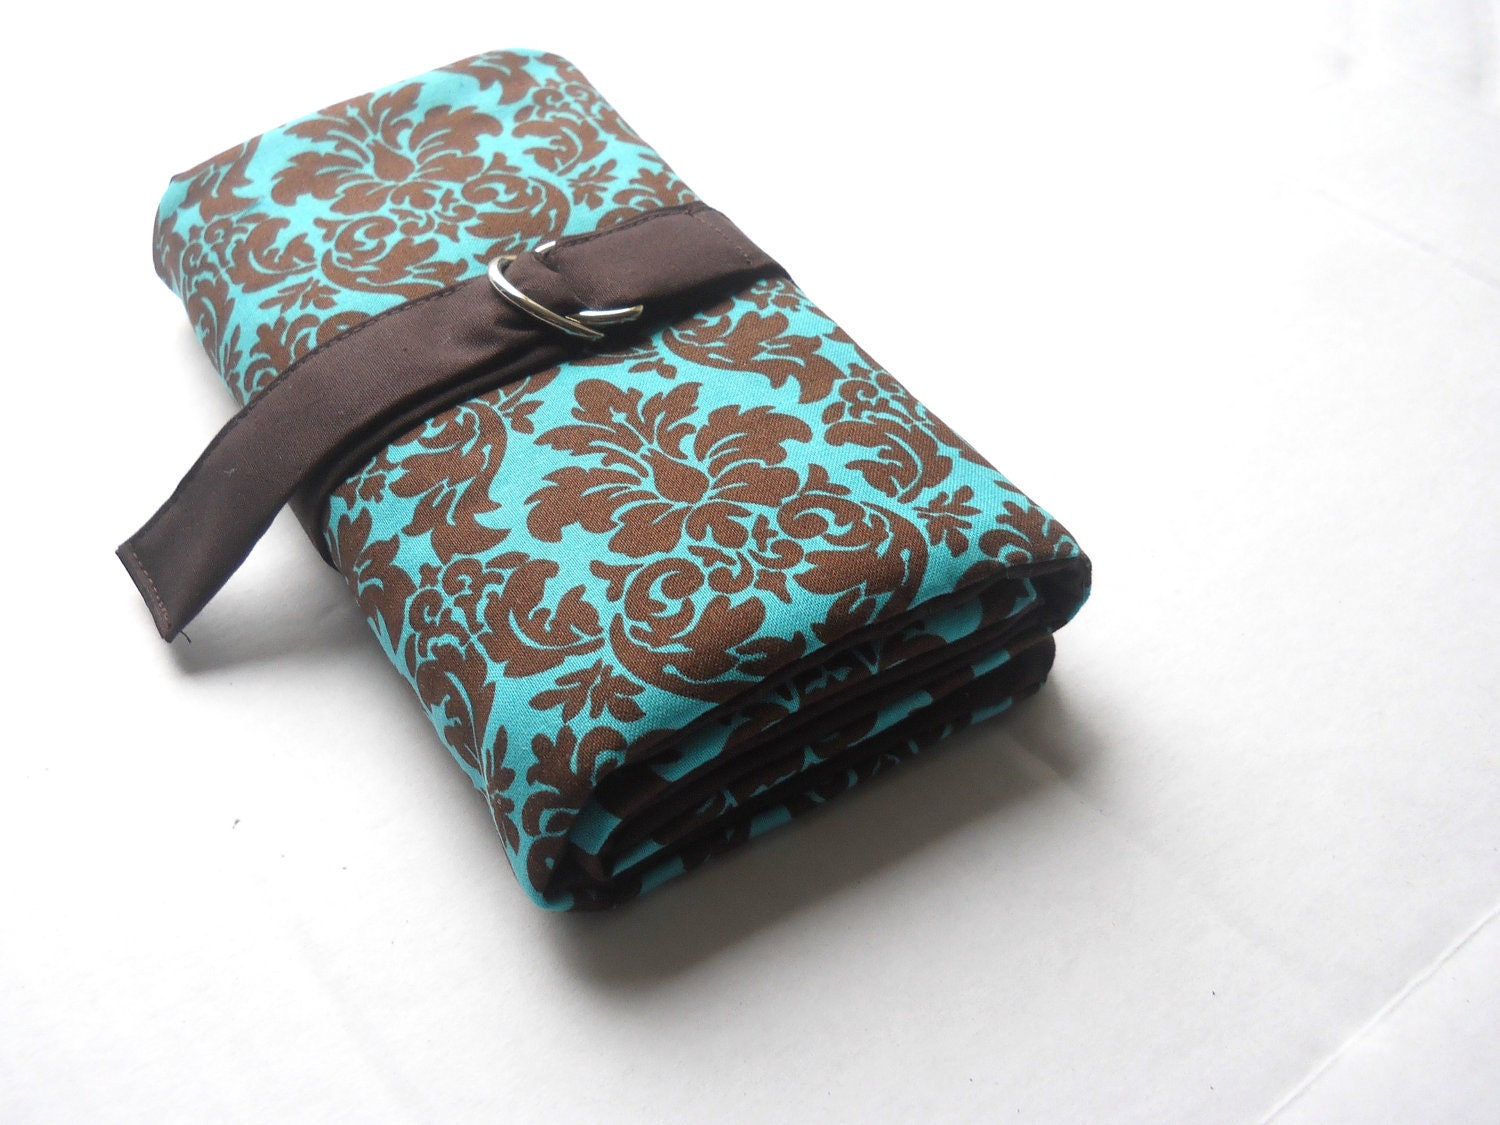 Double pointed needle case-Teal and brown damask